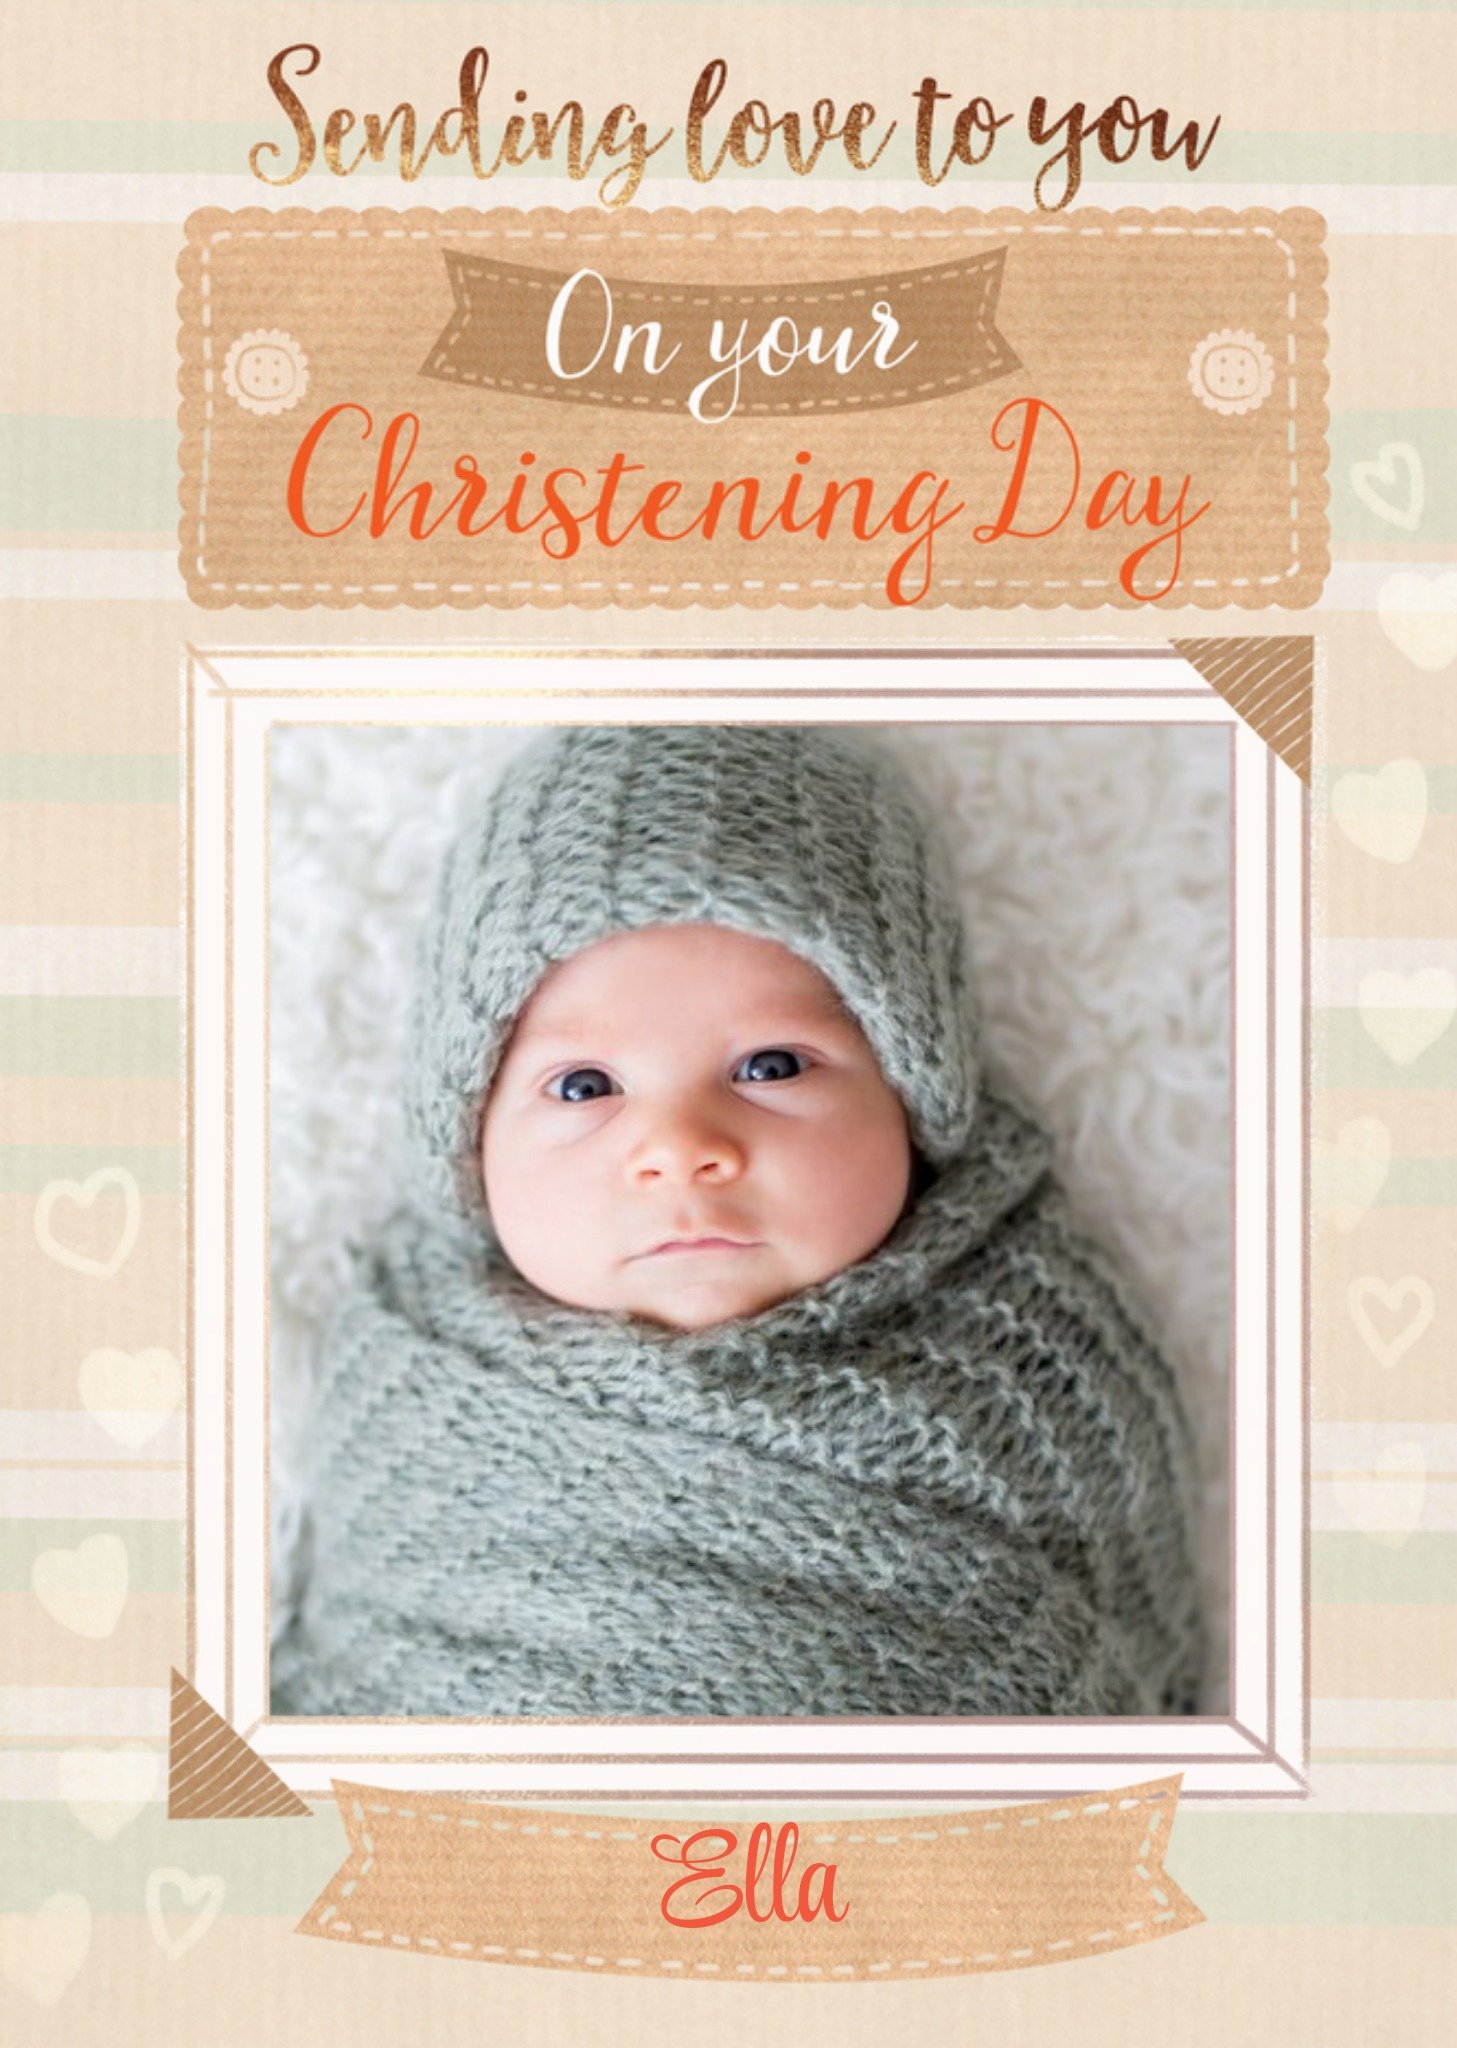 Moonpig Typographic Sending Love To You On Your Christening Day Photo Upload Card, Large